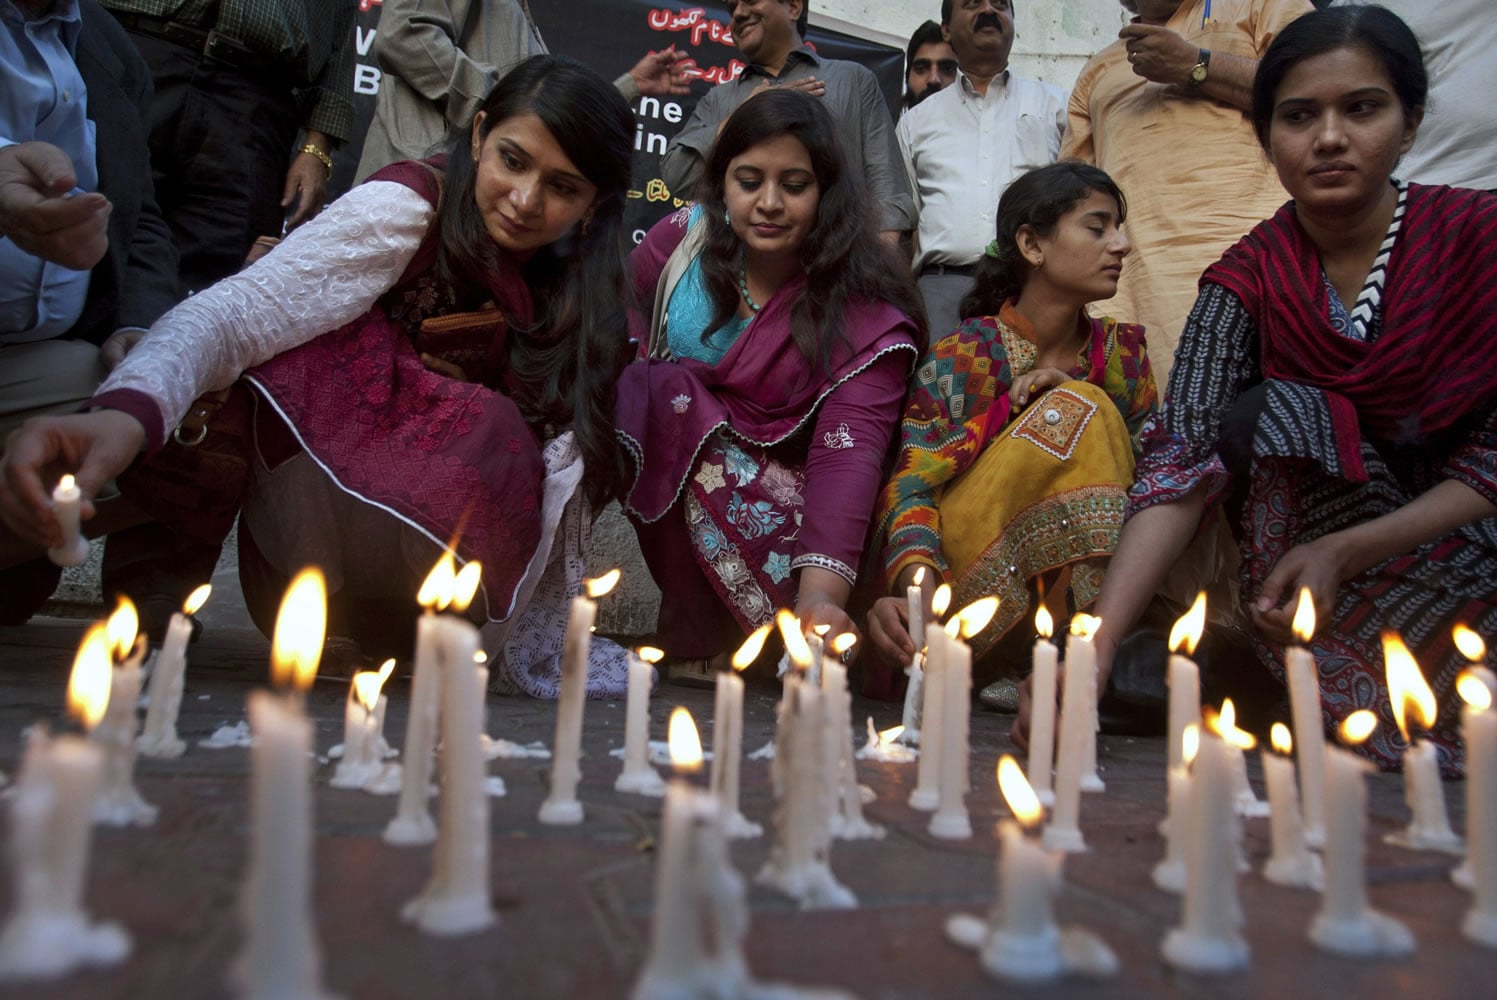 Members of a civil society group light candles Monday in Karachi, Pakistan during a vigil for the victims of Sunday&#039;s suicide bombing. Pakistan&#039;s prime minister vowed to eliminate perpetrators of terror attacks such as the massive suicide bombing that targeted Christians gathered for Easter the previous day in the eastern city of Lahore.